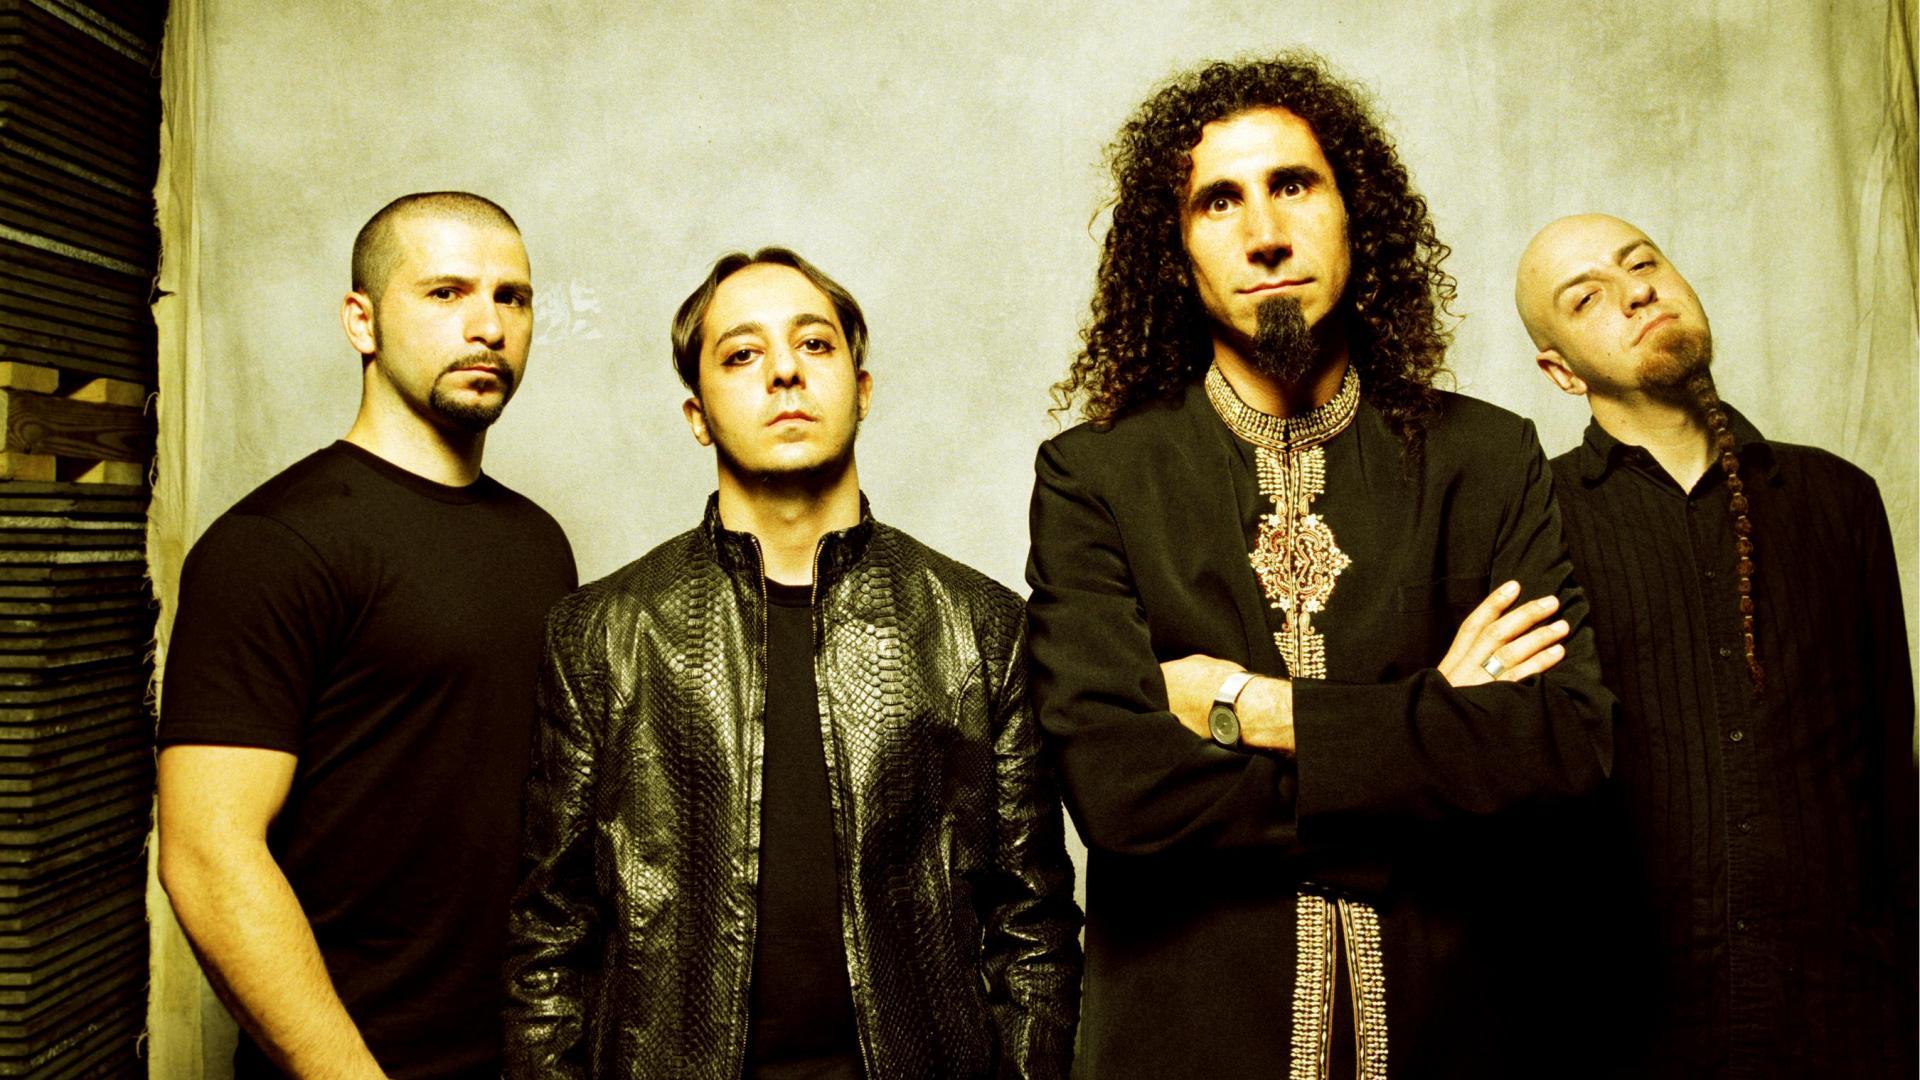 System Of Down Wallpaper